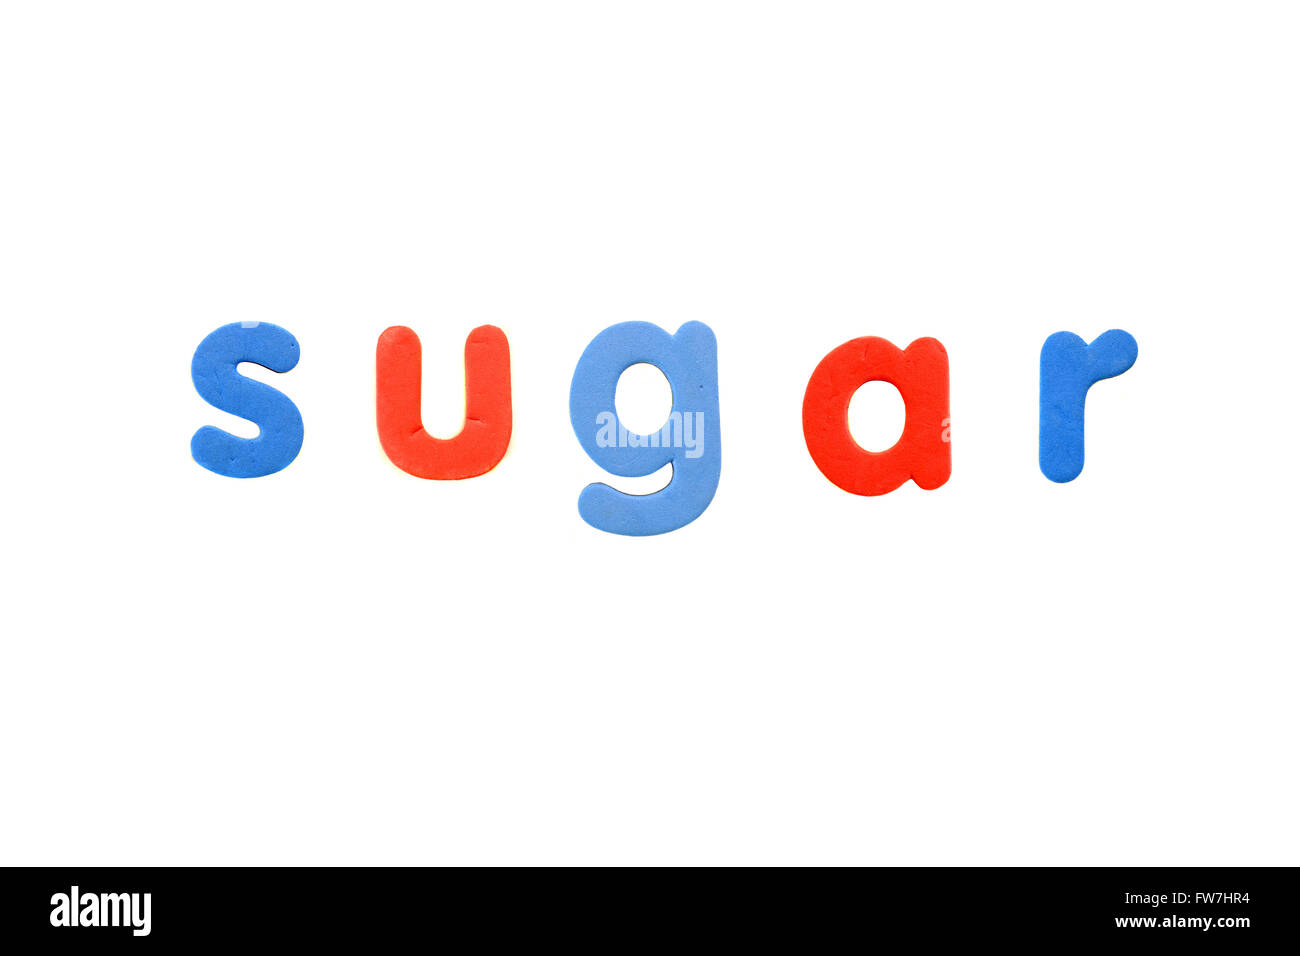 The word Sugar created from magnetic fridge alphabet pieces photographed against a white background. Stock Photo